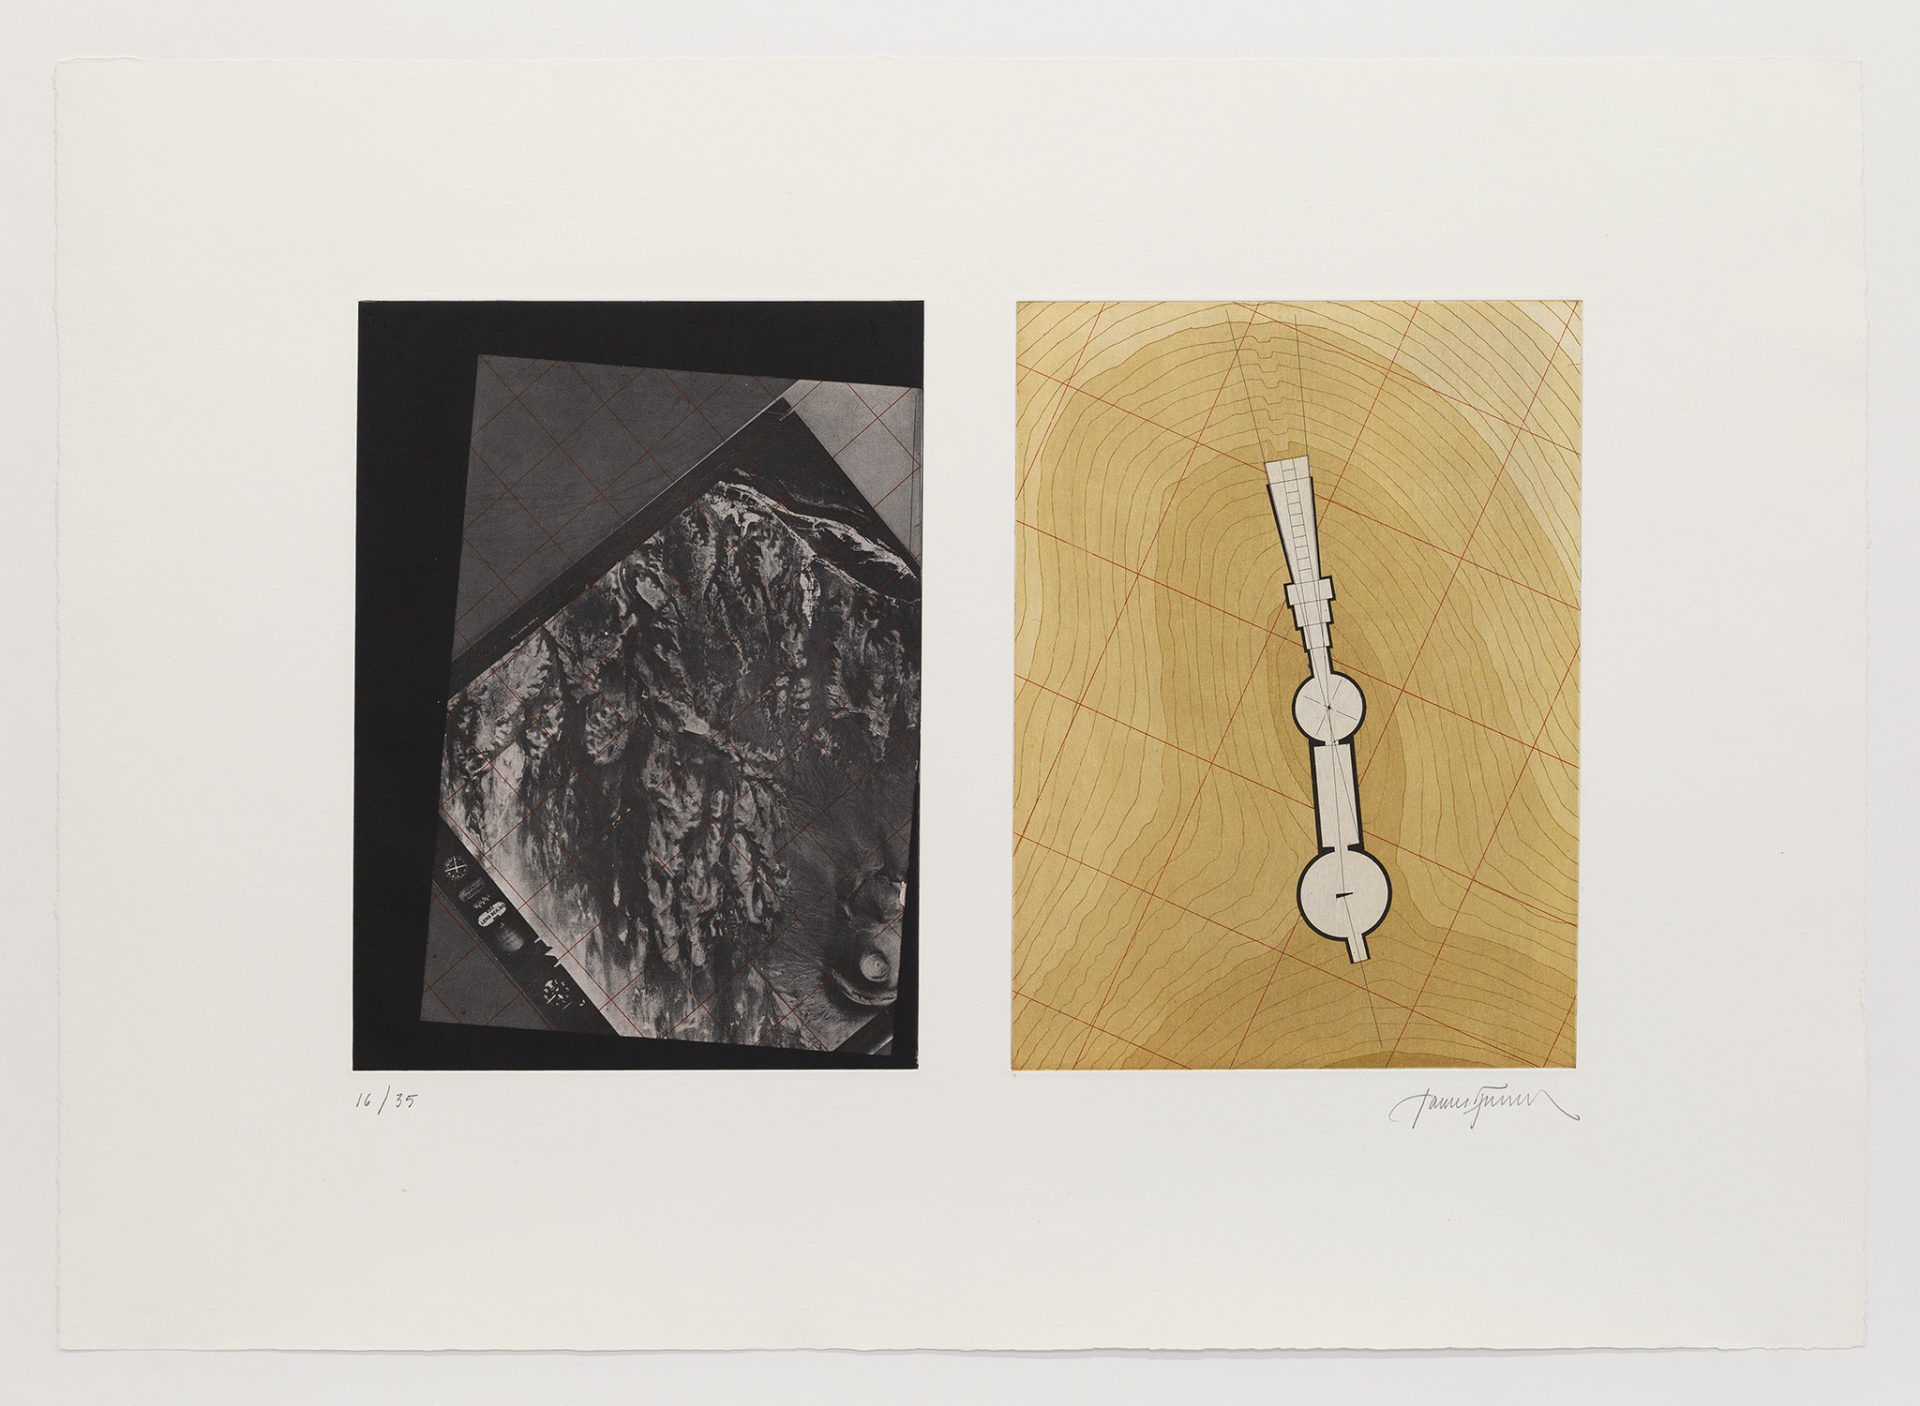 Crater Bowl/Cross Section, 1988, Etching, aquatint, photo-etching, drypoint and softground22 x 30 3/4 inches (55.9 x 78.1 cm)Edition of 35